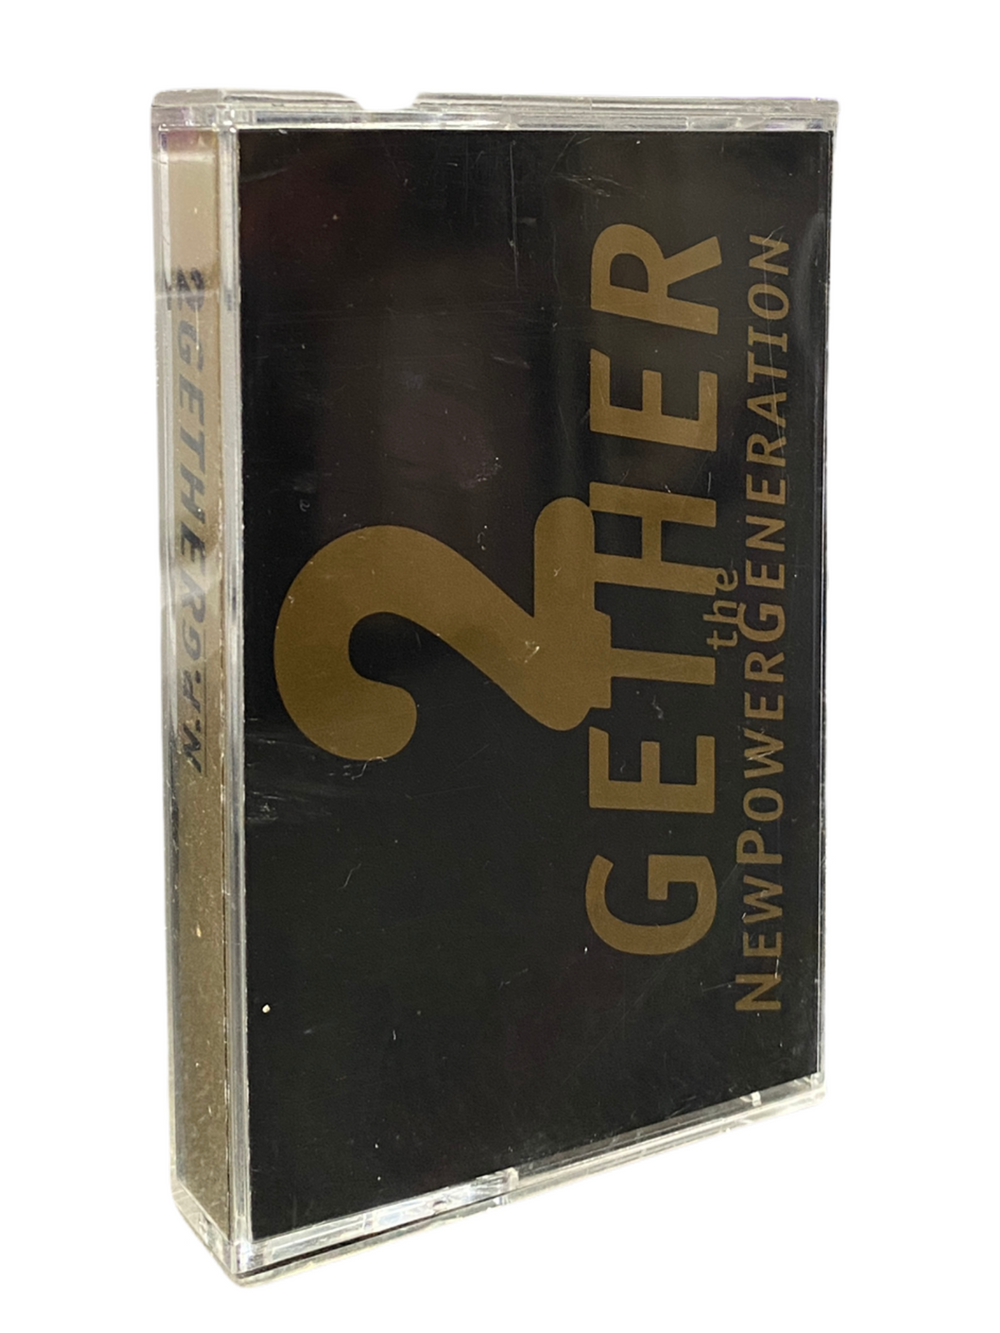 Prince – & New Power Generation -2gether Cassette Single Sided US Preloved: 1993